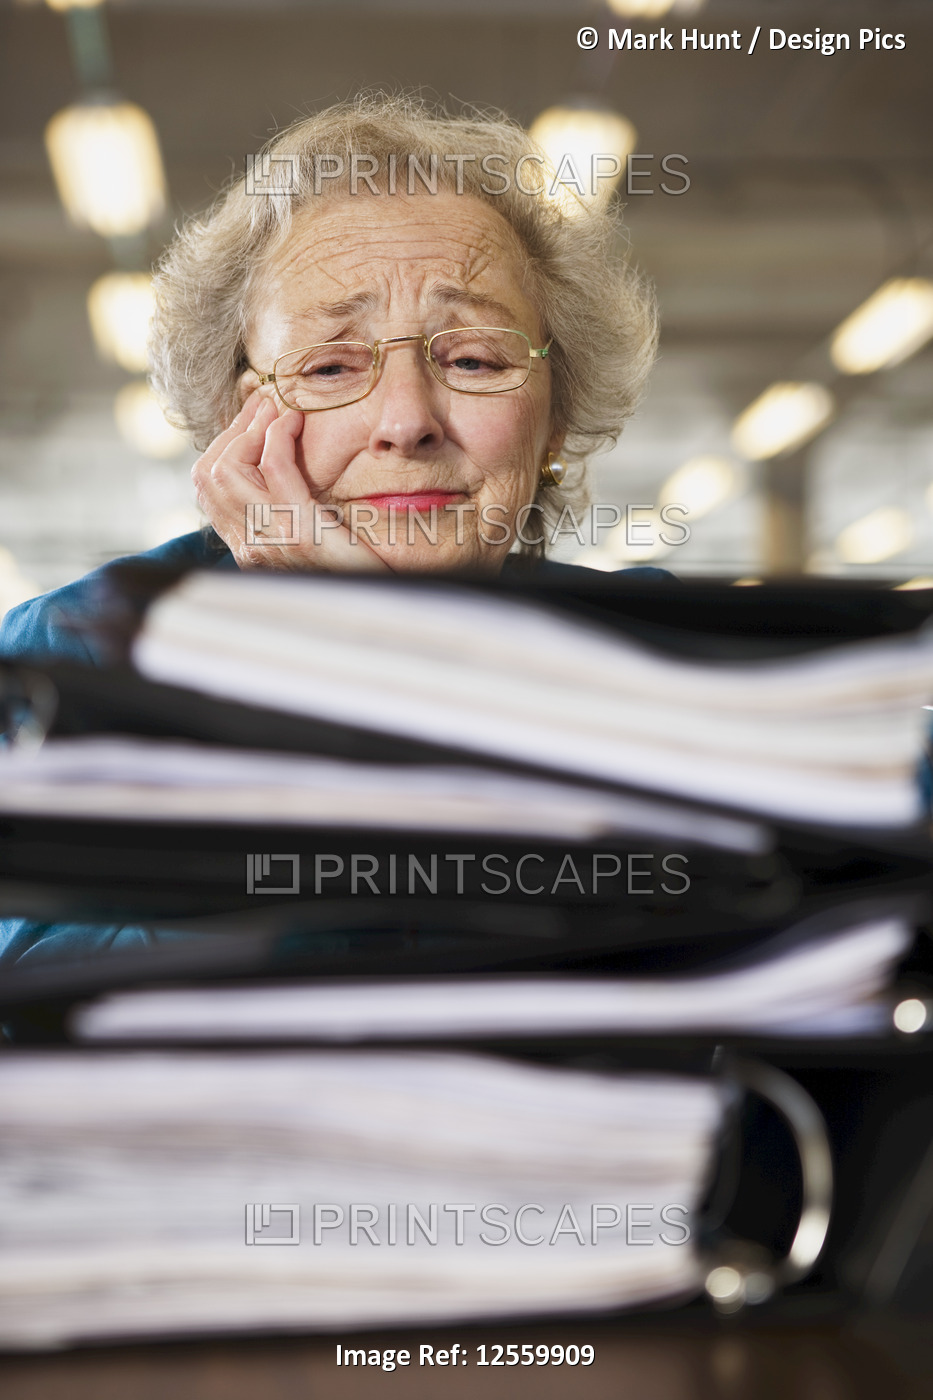 View of a senior woman tensed with workload.